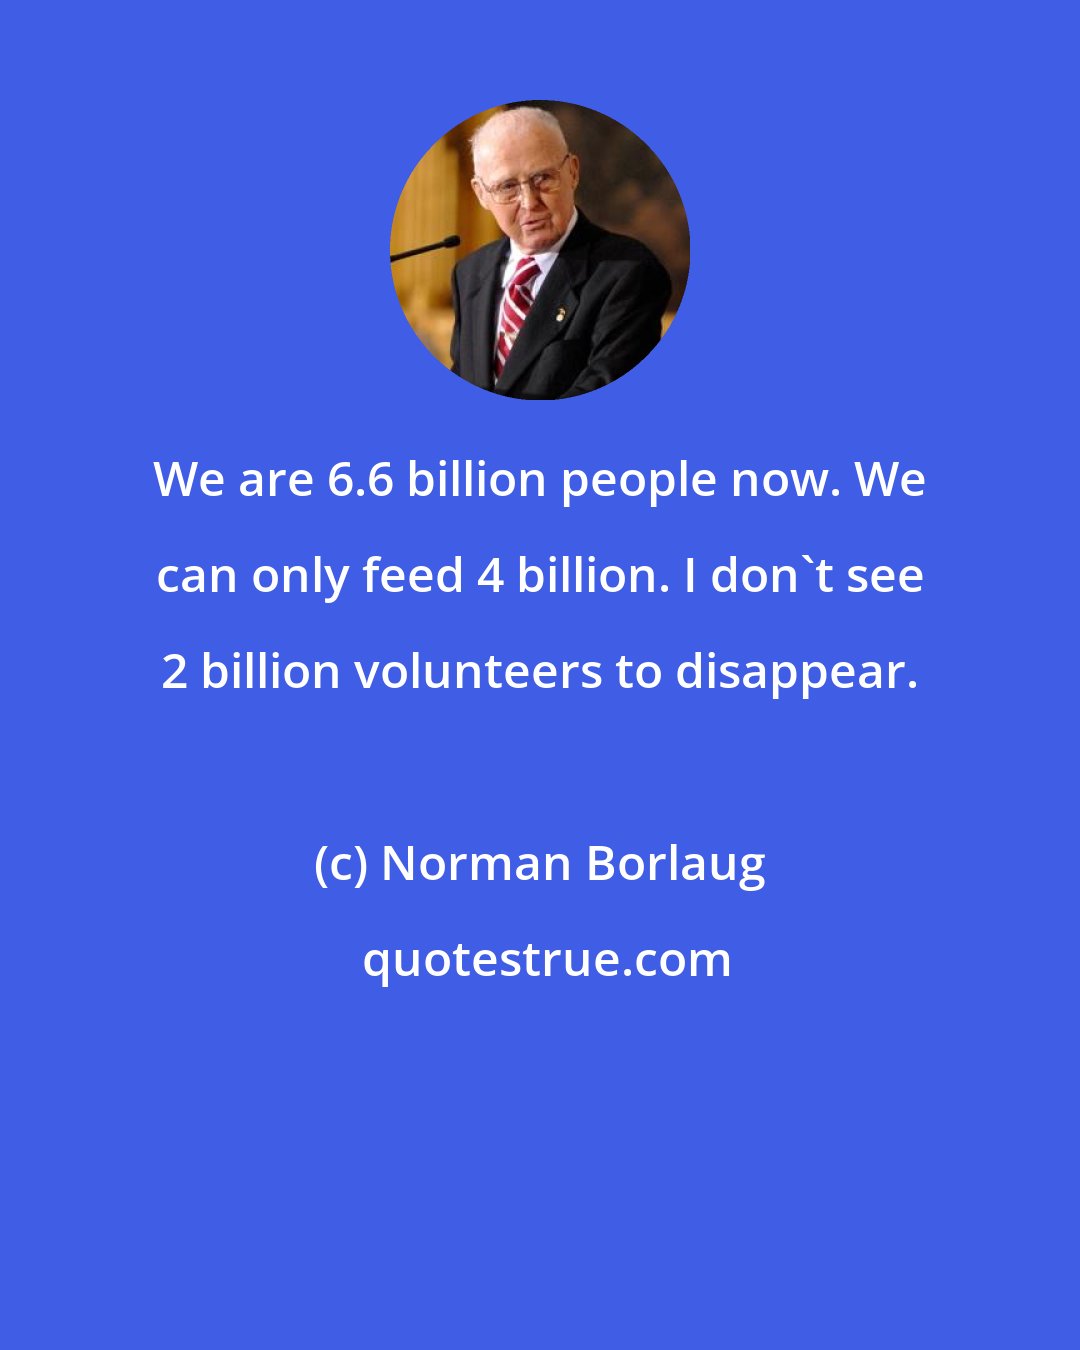 Norman Borlaug: We are 6.6 billion people now. We can only feed 4 billion. I don't see 2 billion volunteers to disappear.